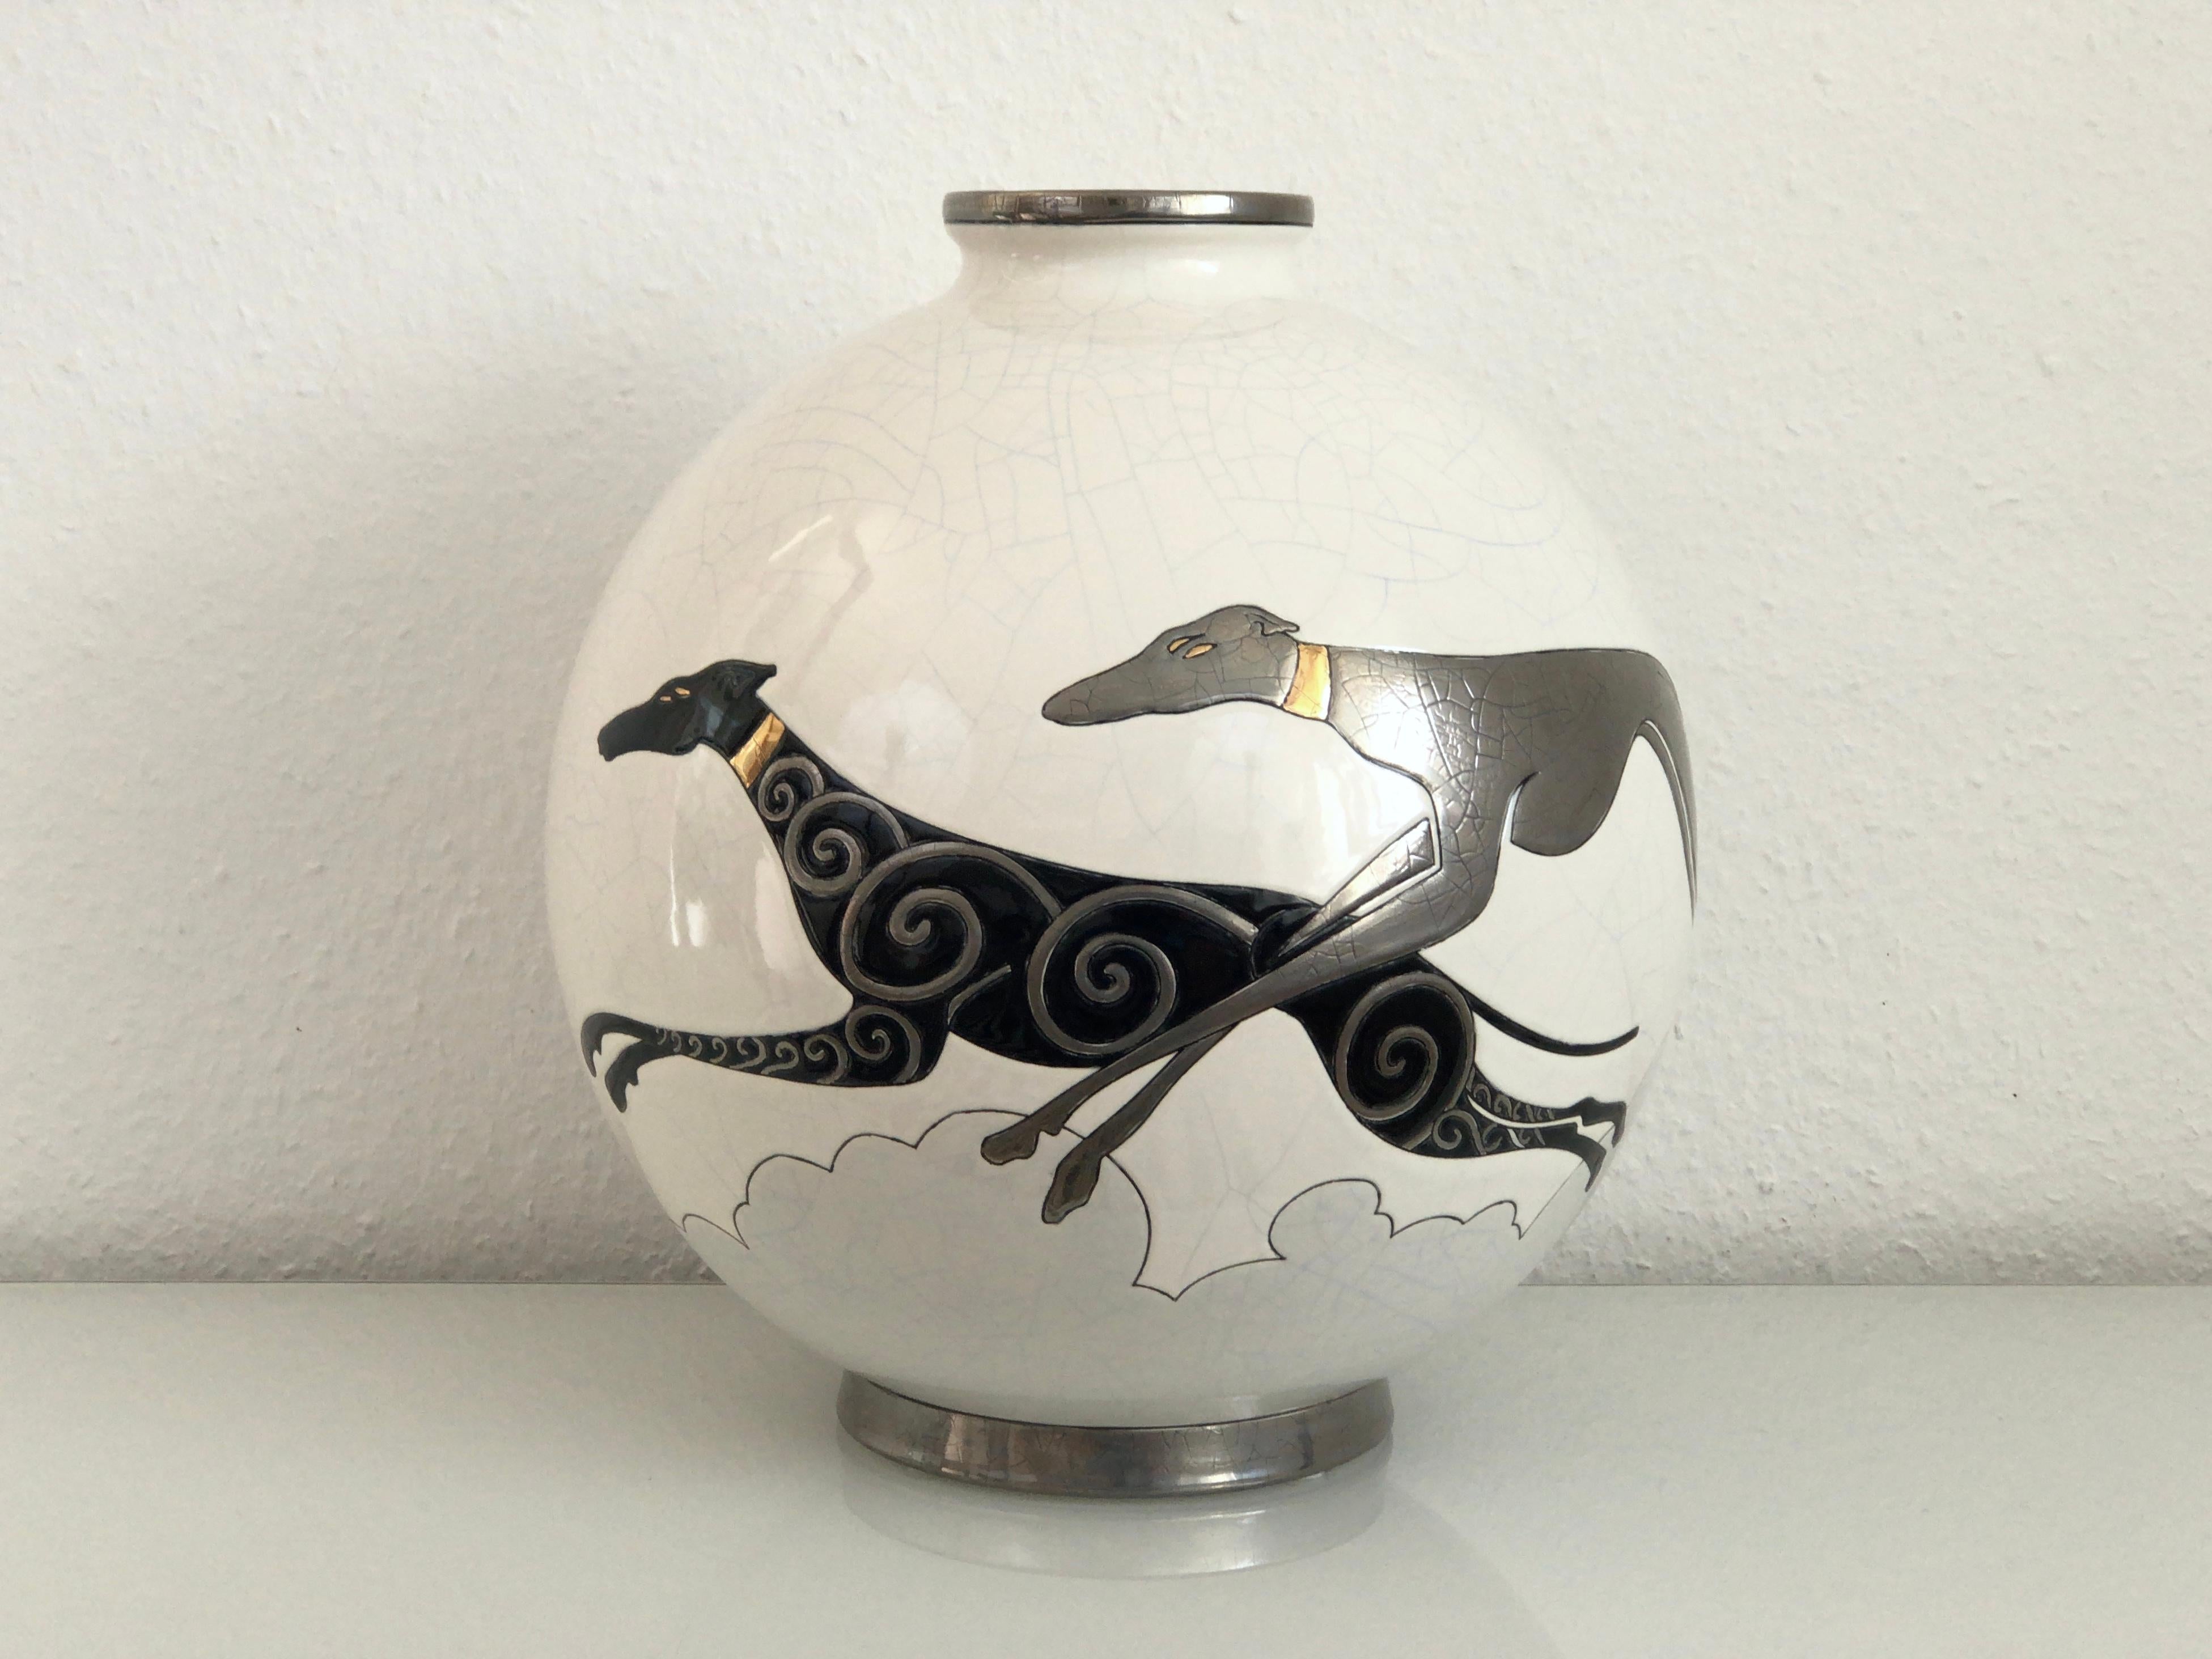 Emaux de Longwy ceramic vase with craqueling glaze
White body with greyhounds 
Limited edition: number 7 of 50 

Danillo Curetti (1953-1993) was one of the first great names in the contemporary creations of Les Emaux de Longwy. The edition of